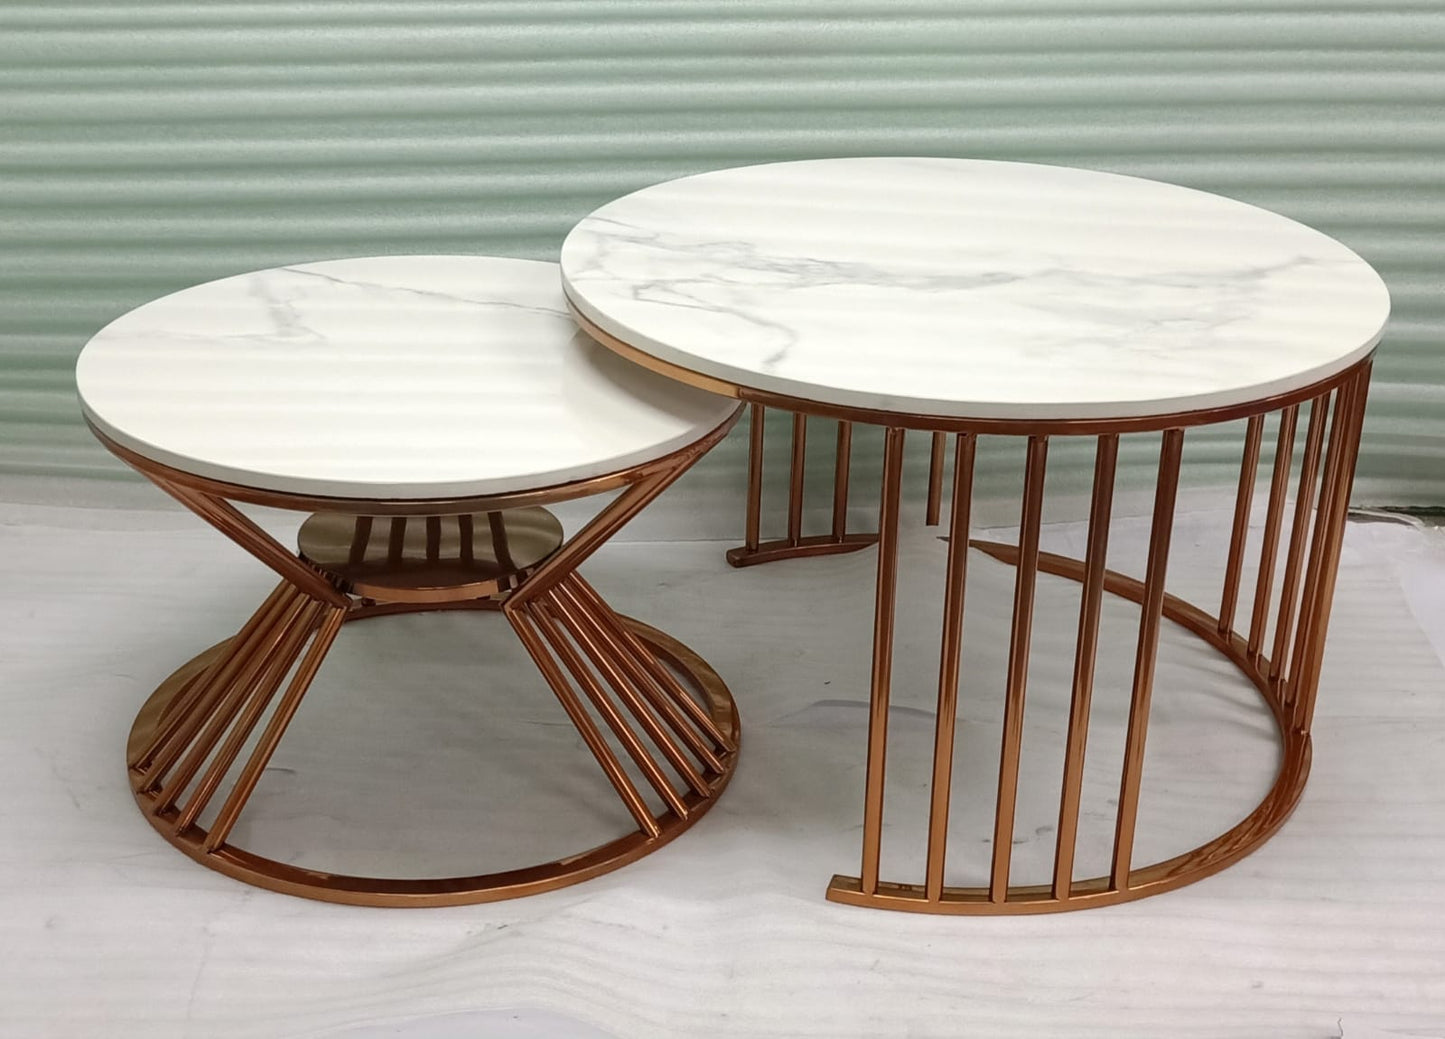 PC Home Decor | Set of 2 Stainless Steel Nesting Table, White and Copper